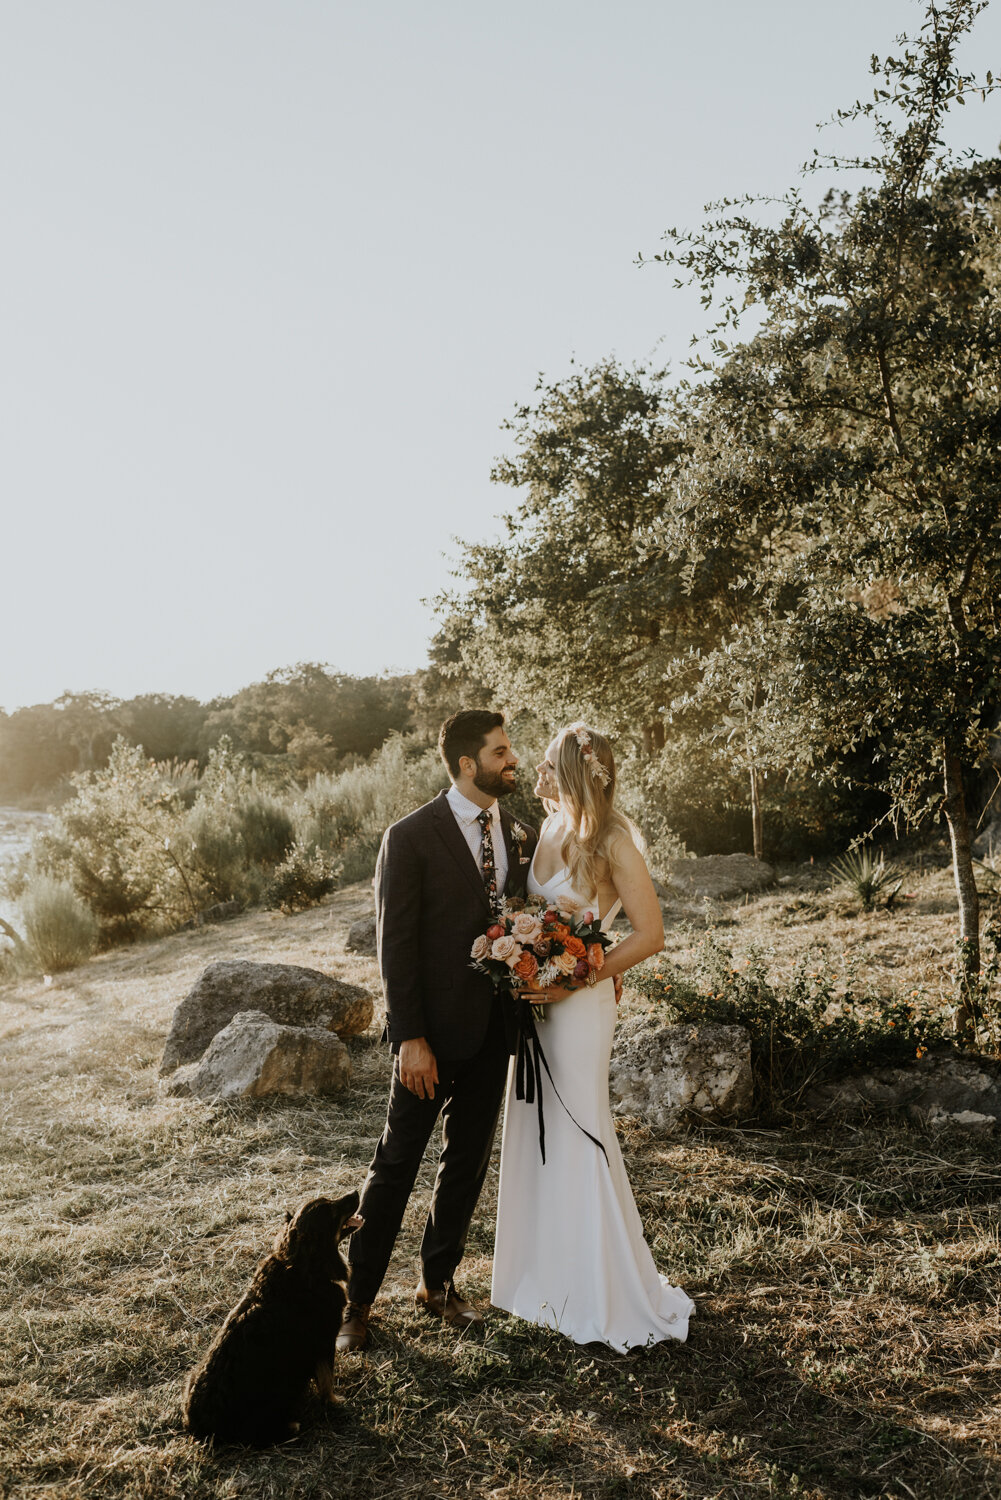 Austin, Texas Cute Elopement Photos with dogs